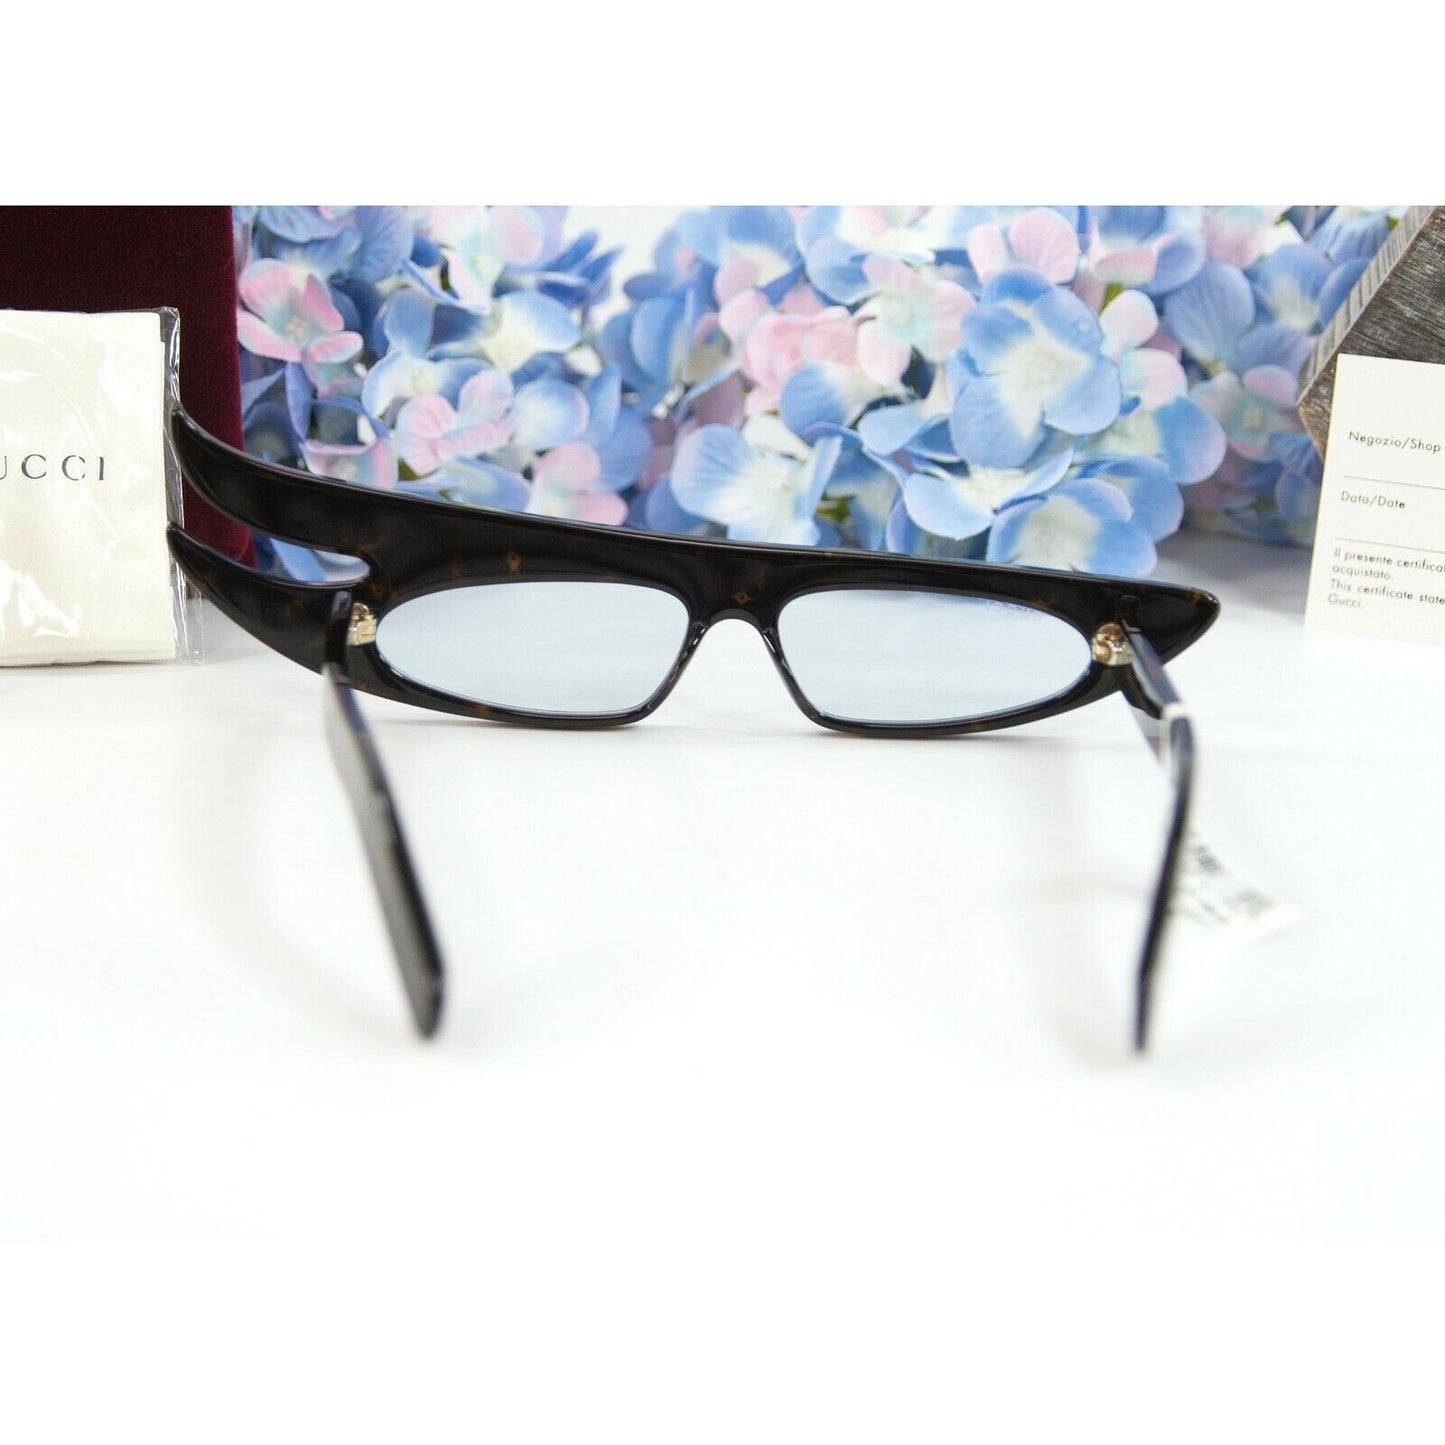 Gucci Crystal Hollywood Forever Oversize Cat Eye Sunglasses NWT $1100 GG0240S